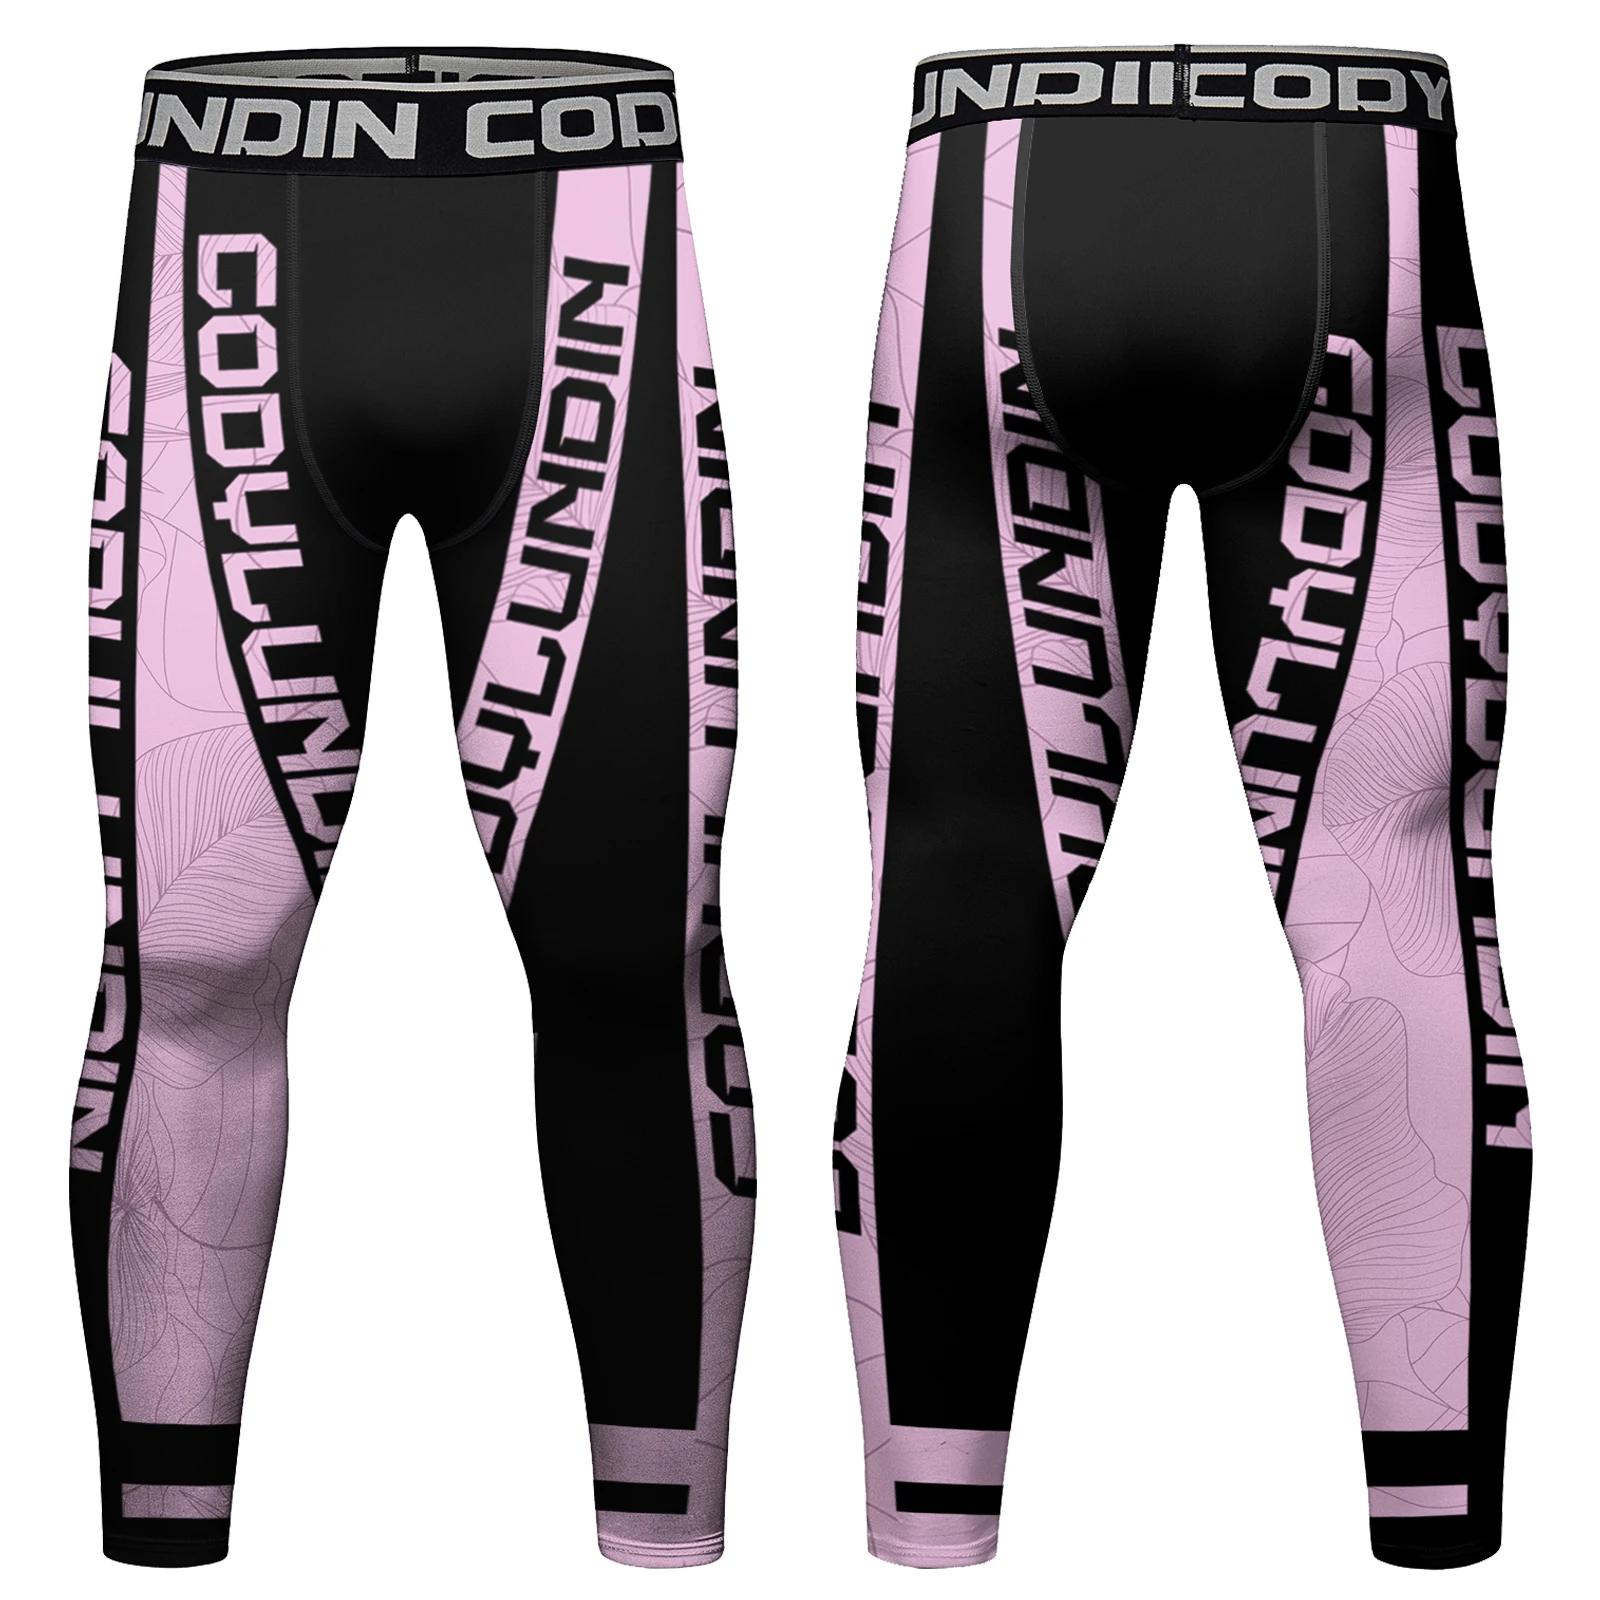 

Cody Lundin Wholesale OEM High quality Running Gym Compression Tights Custom Sublimation Print Sport Leggings For Men Adults